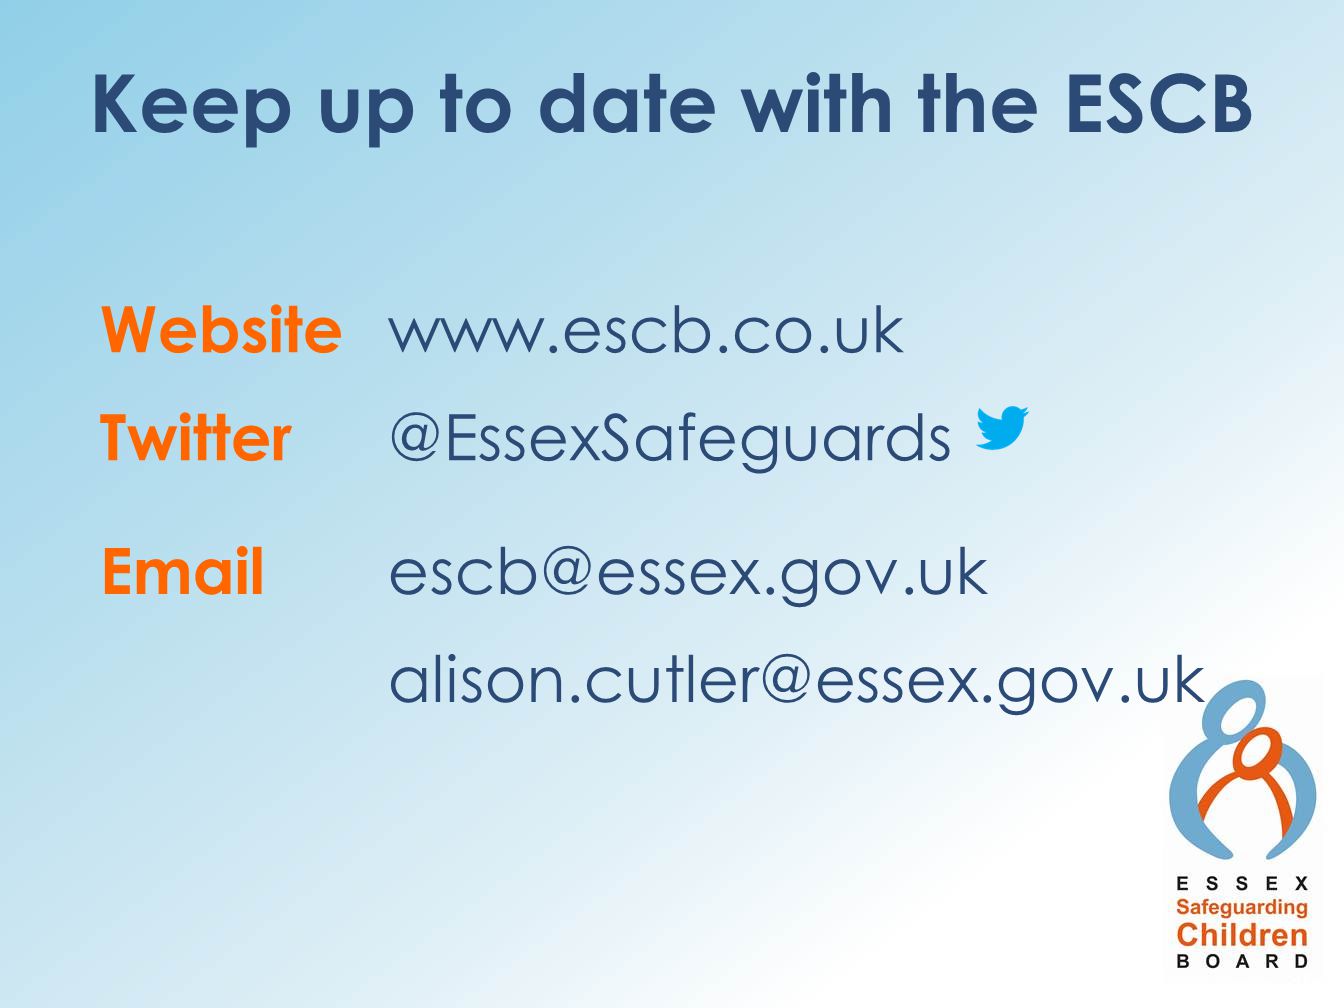 Keep up to date with the ESCB